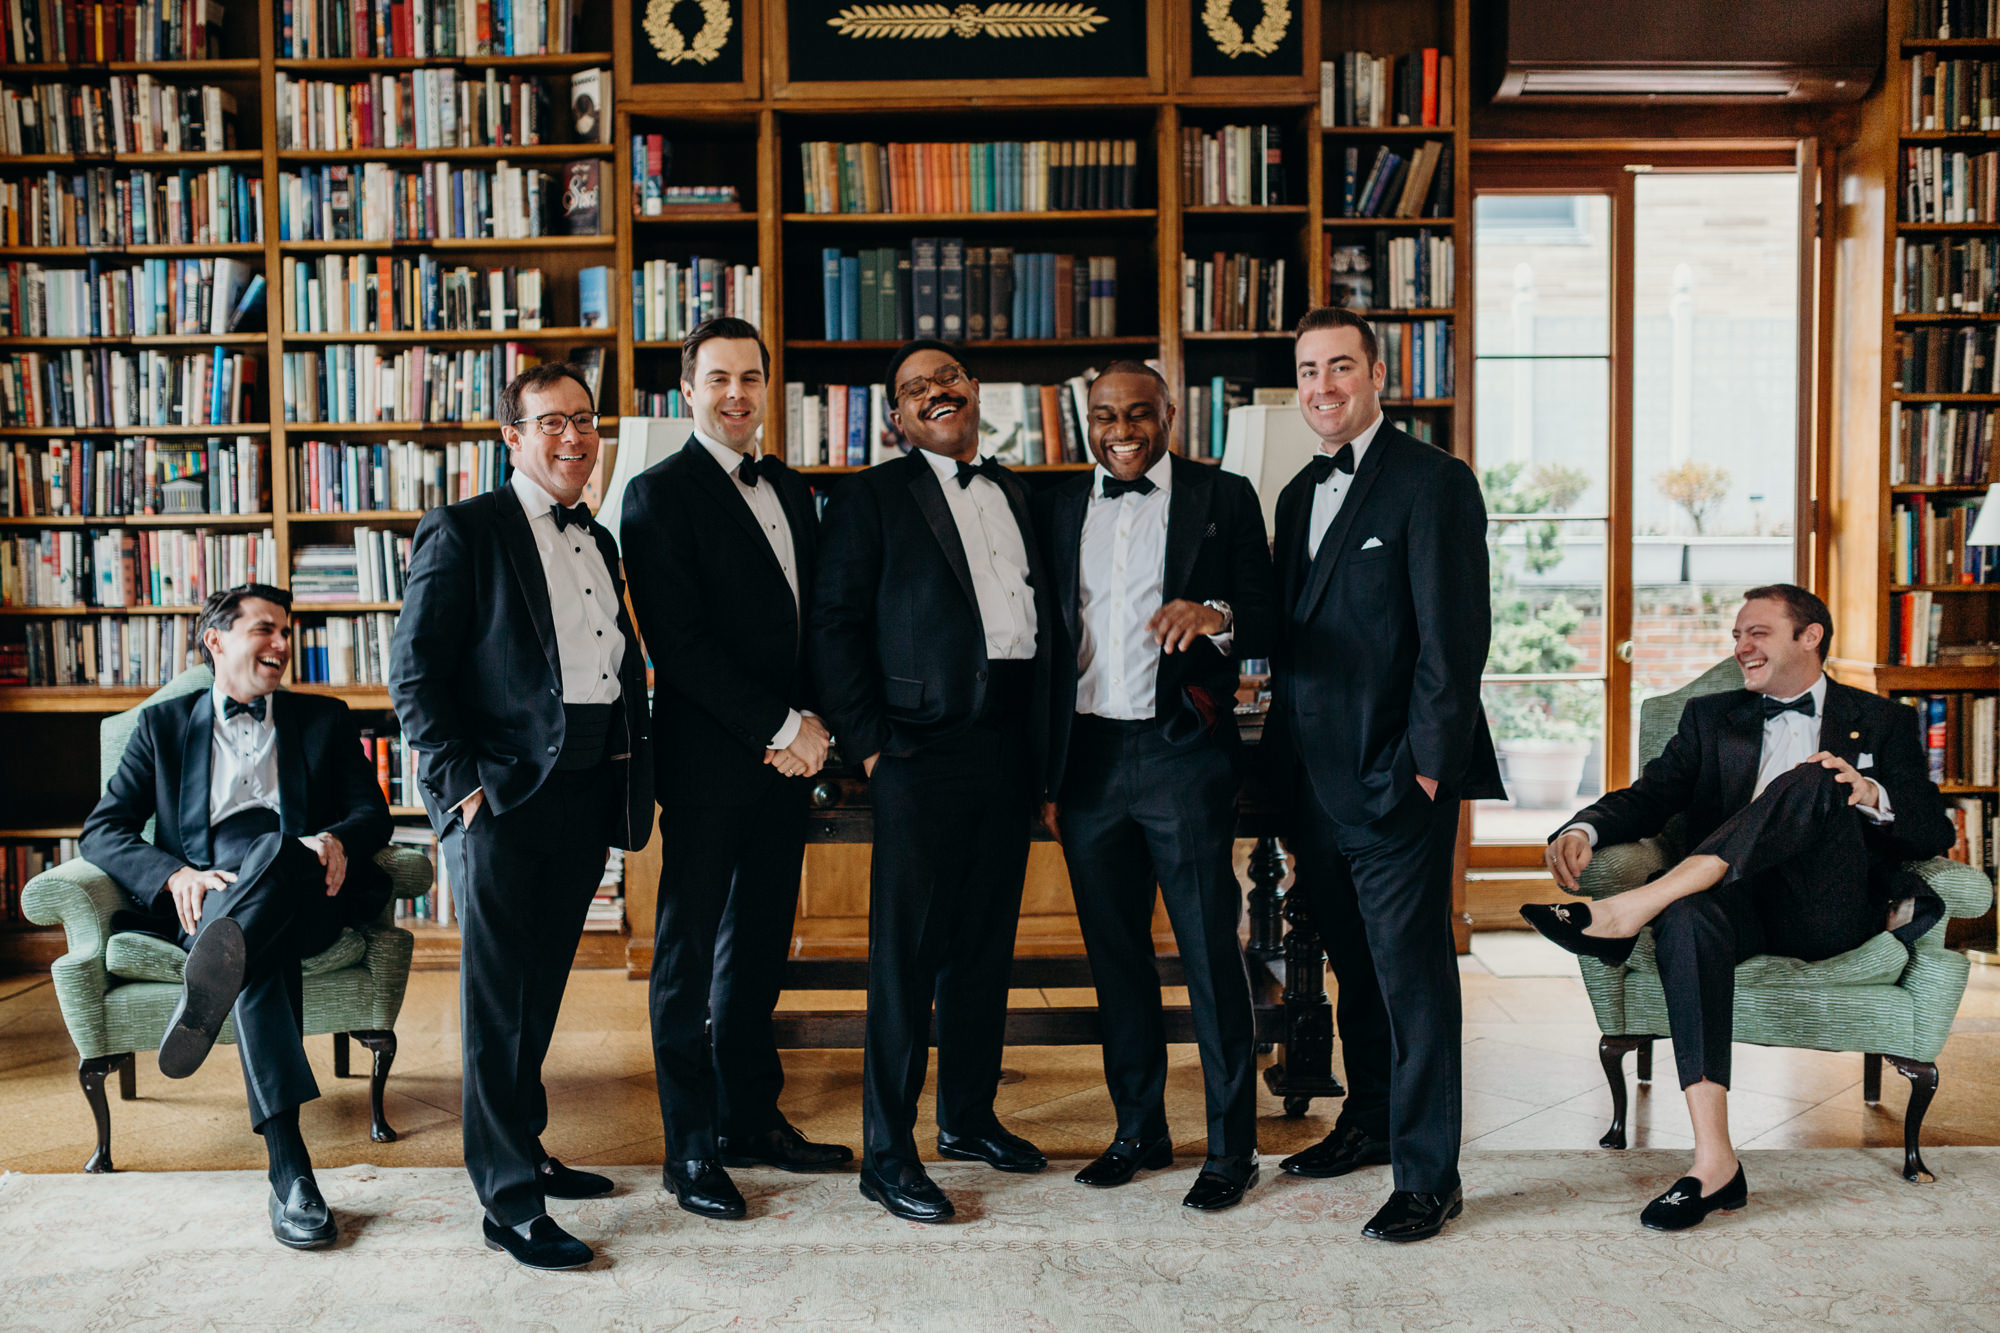 groom and groomsman portrait at cosmopolitan club in new york city, ny